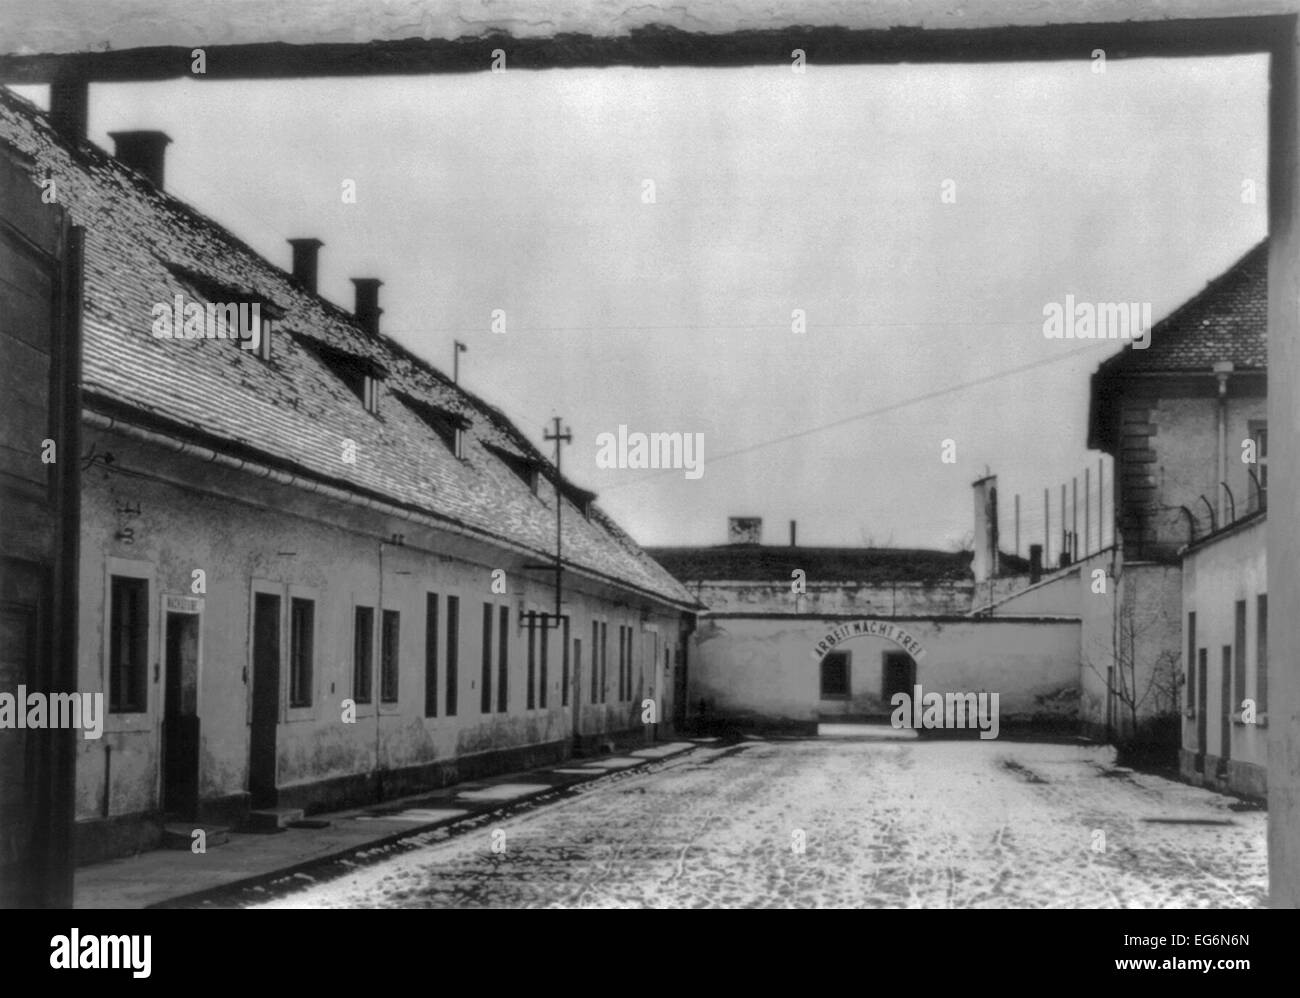 Theresienstadt concentration camp with sign 'Arbeit macht frei,' (Work makes you free). The slogan was placed over the Stock Photo